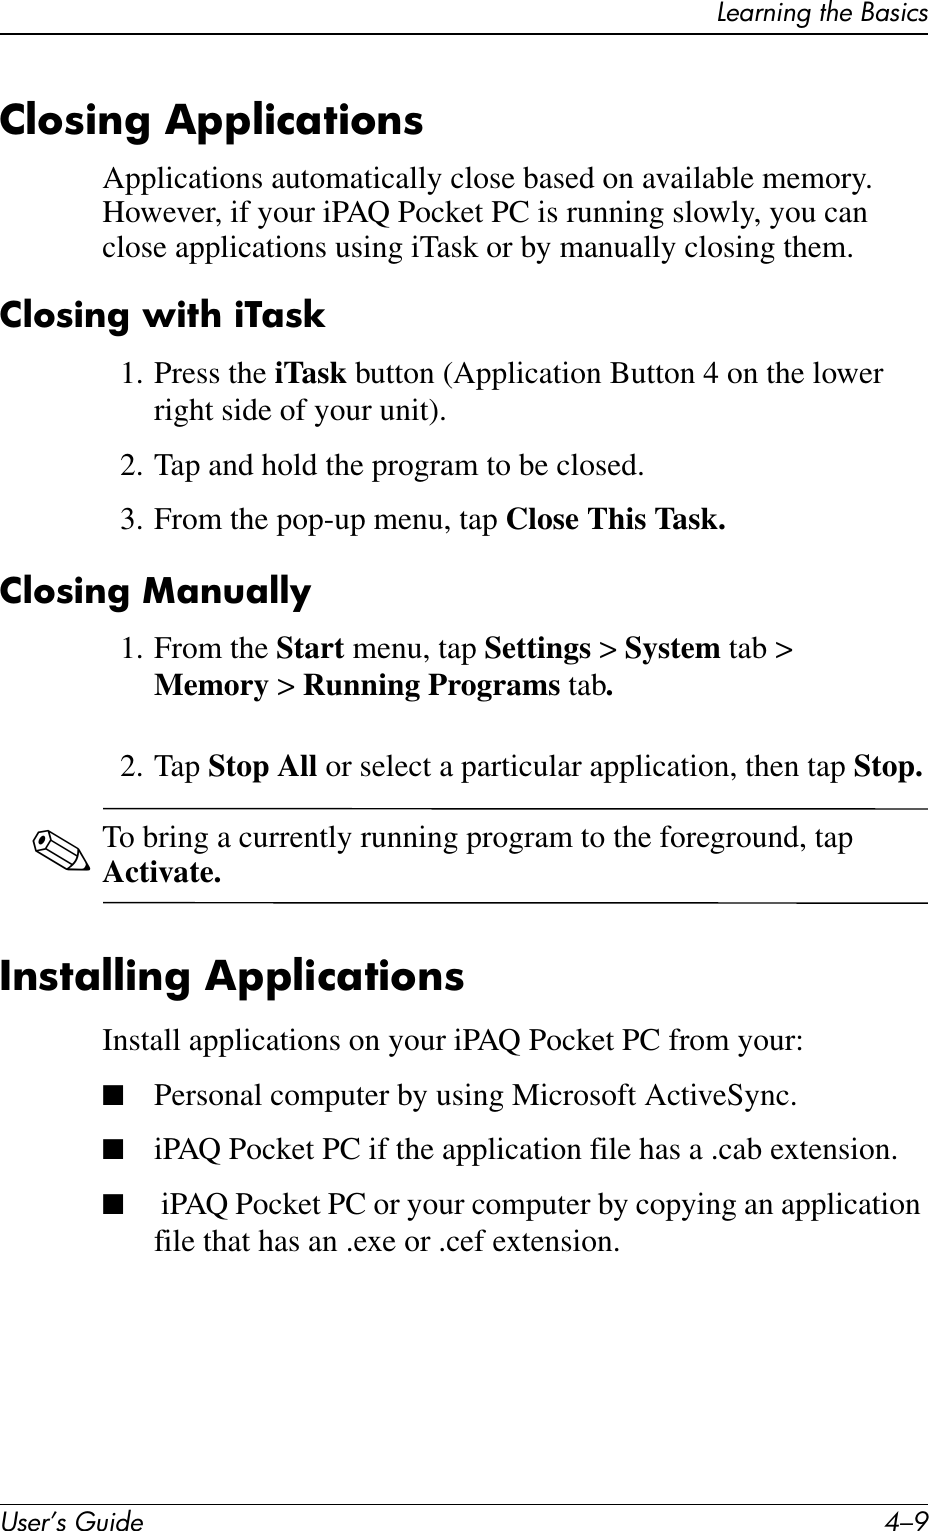 Learning the BasicsUser’s Guide 4–9Closing ApplicationsApplications automatically close based on available memory. However, if your iPAQ Pocket PC is running slowly, you can close applications using iTask or by manually closing them.Closing with iTask1. Press the iTask button (Application Button 4 on the lower right side of your unit).2. Tap and hold the program to be closed.3. From the pop-up menu, tap Close This Task.Closing Manually1. From the Start menu, tap Settings &gt; System tab &gt; Memory &gt; Running Programs tab.2. Tap Stop All or select a particular application, then tap Stop.✎To bring a currently running program to the foreground, tap Activate.Installing ApplicationsInstall applications on your iPAQ Pocket PC from your:■Personal computer by using Microsoft ActiveSync.■iPAQ Pocket PC if the application file has a .cab extension.■ iPAQ Pocket PC or your computer by copying an application file that has an .exe or .cef extension.